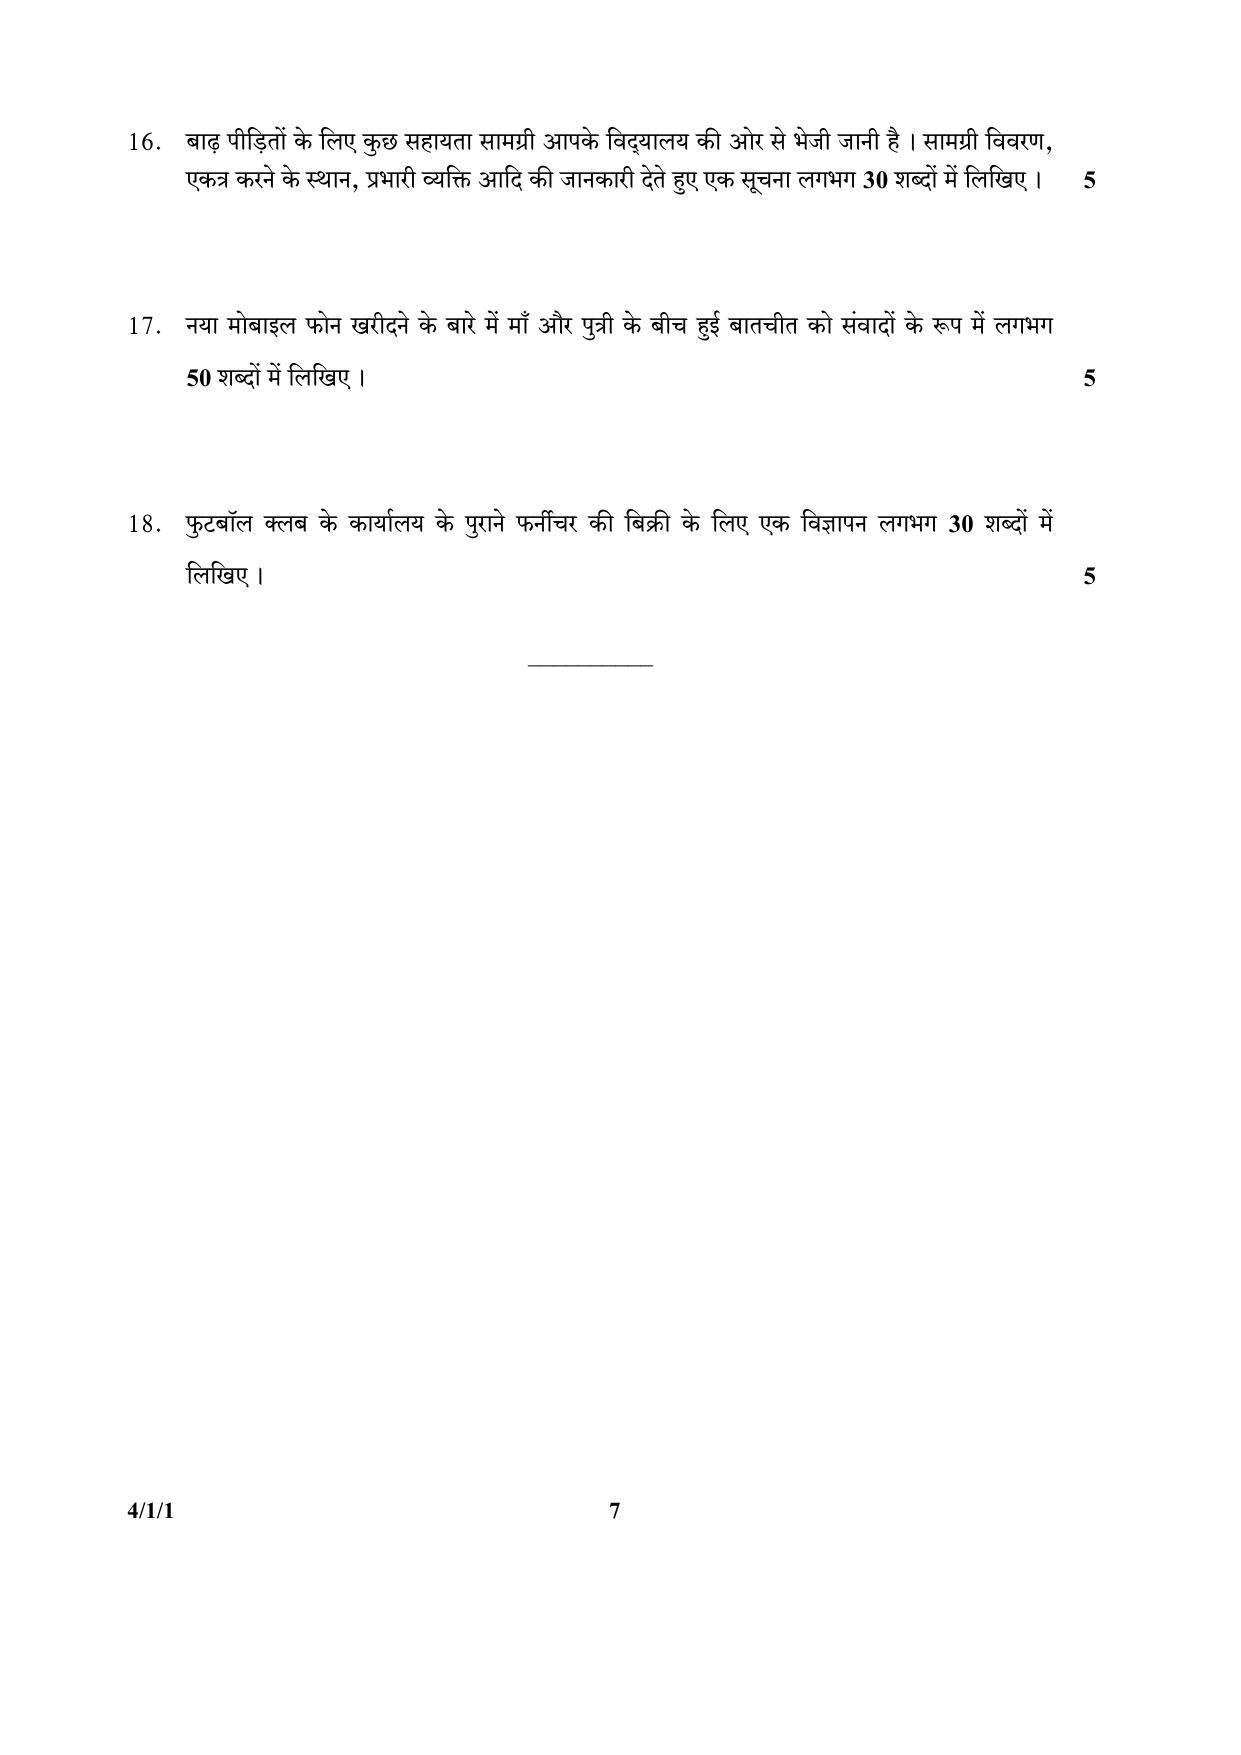 CBSE Class 10 4-1-1_Hindi 2017-comptt Question Paper - Page 7